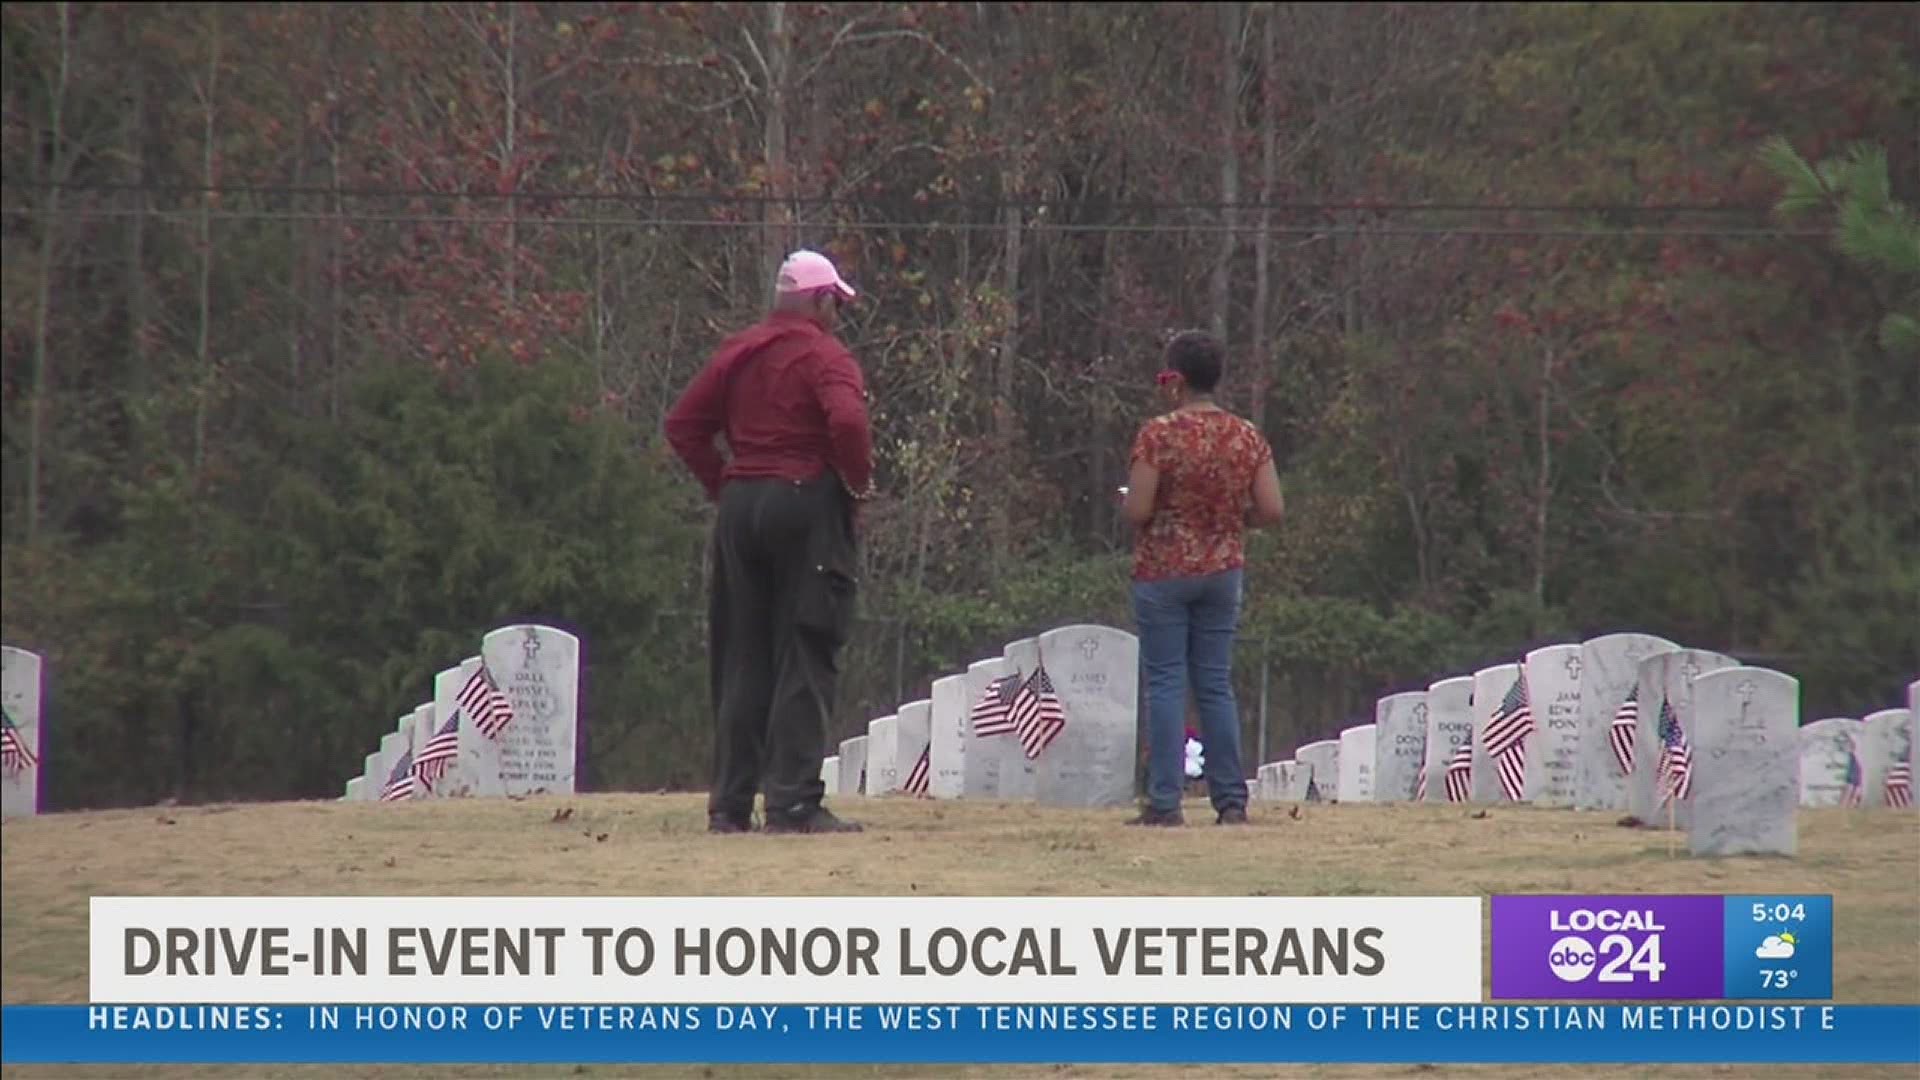 At 7:00 p.m. on Veterans Day, a service honoring veterans will be held at the Malco Drive-In Theater on Summer in Memphis.